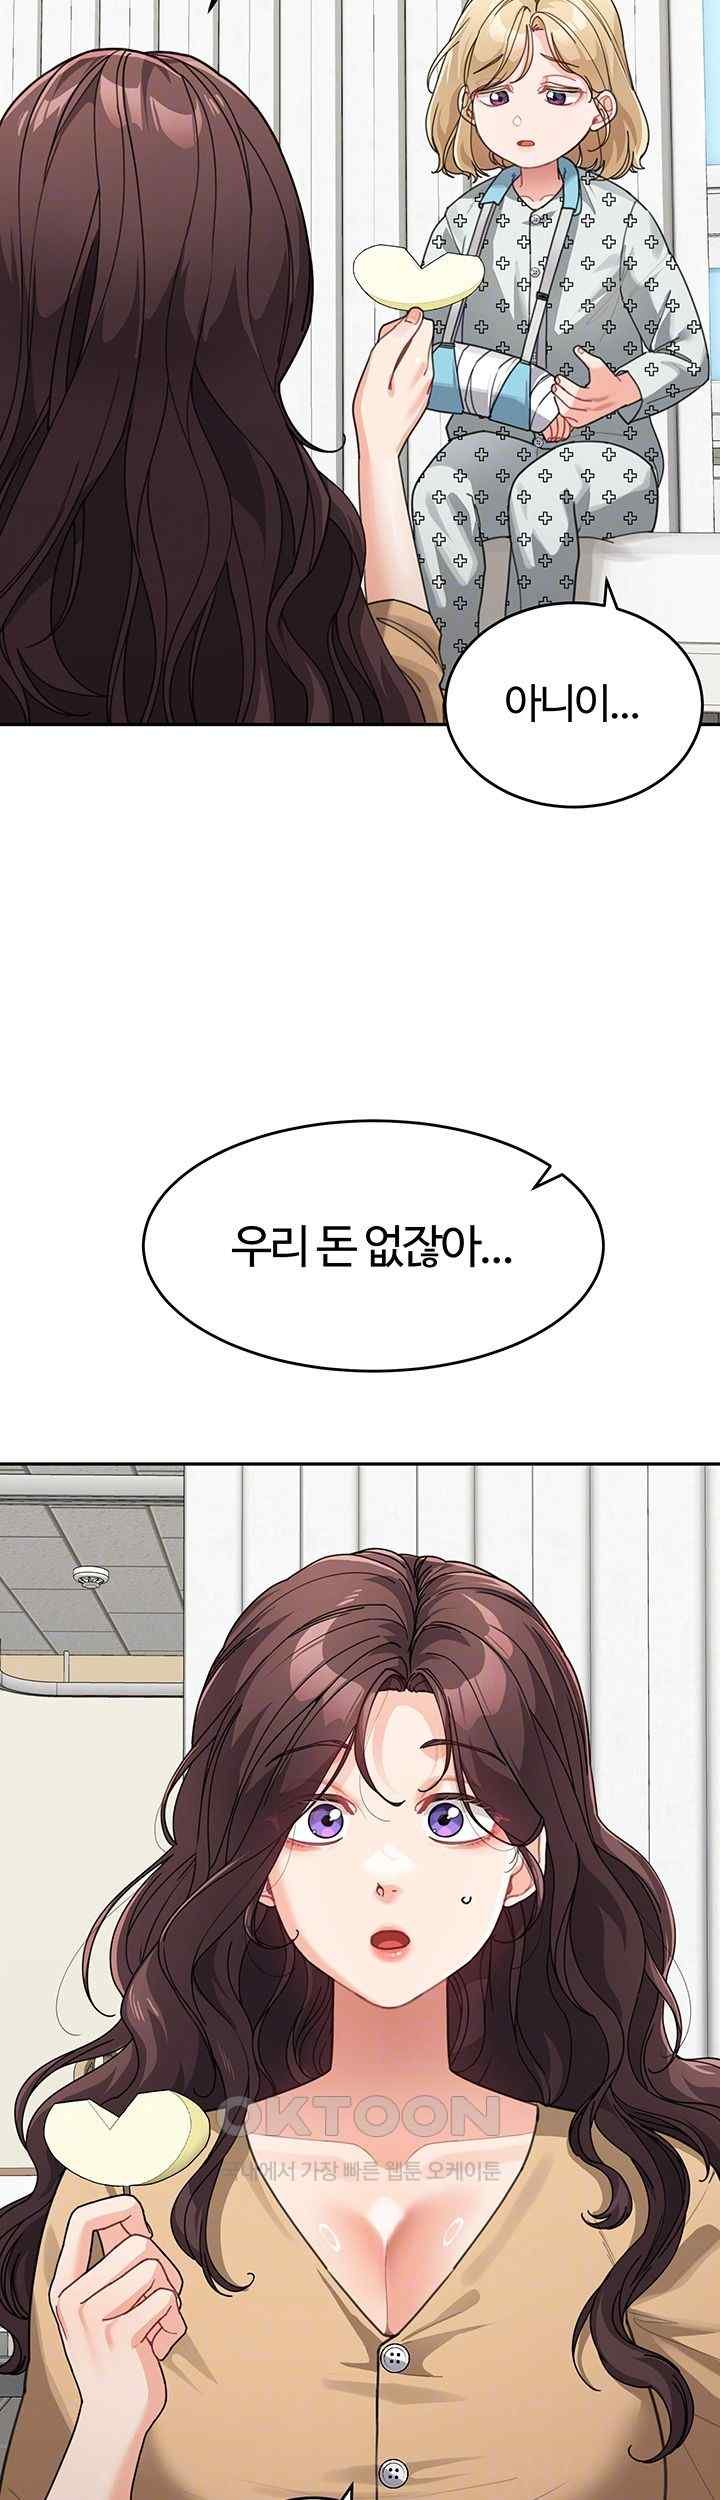 is-it-your-mother-or-sister-raw-chap-35-5